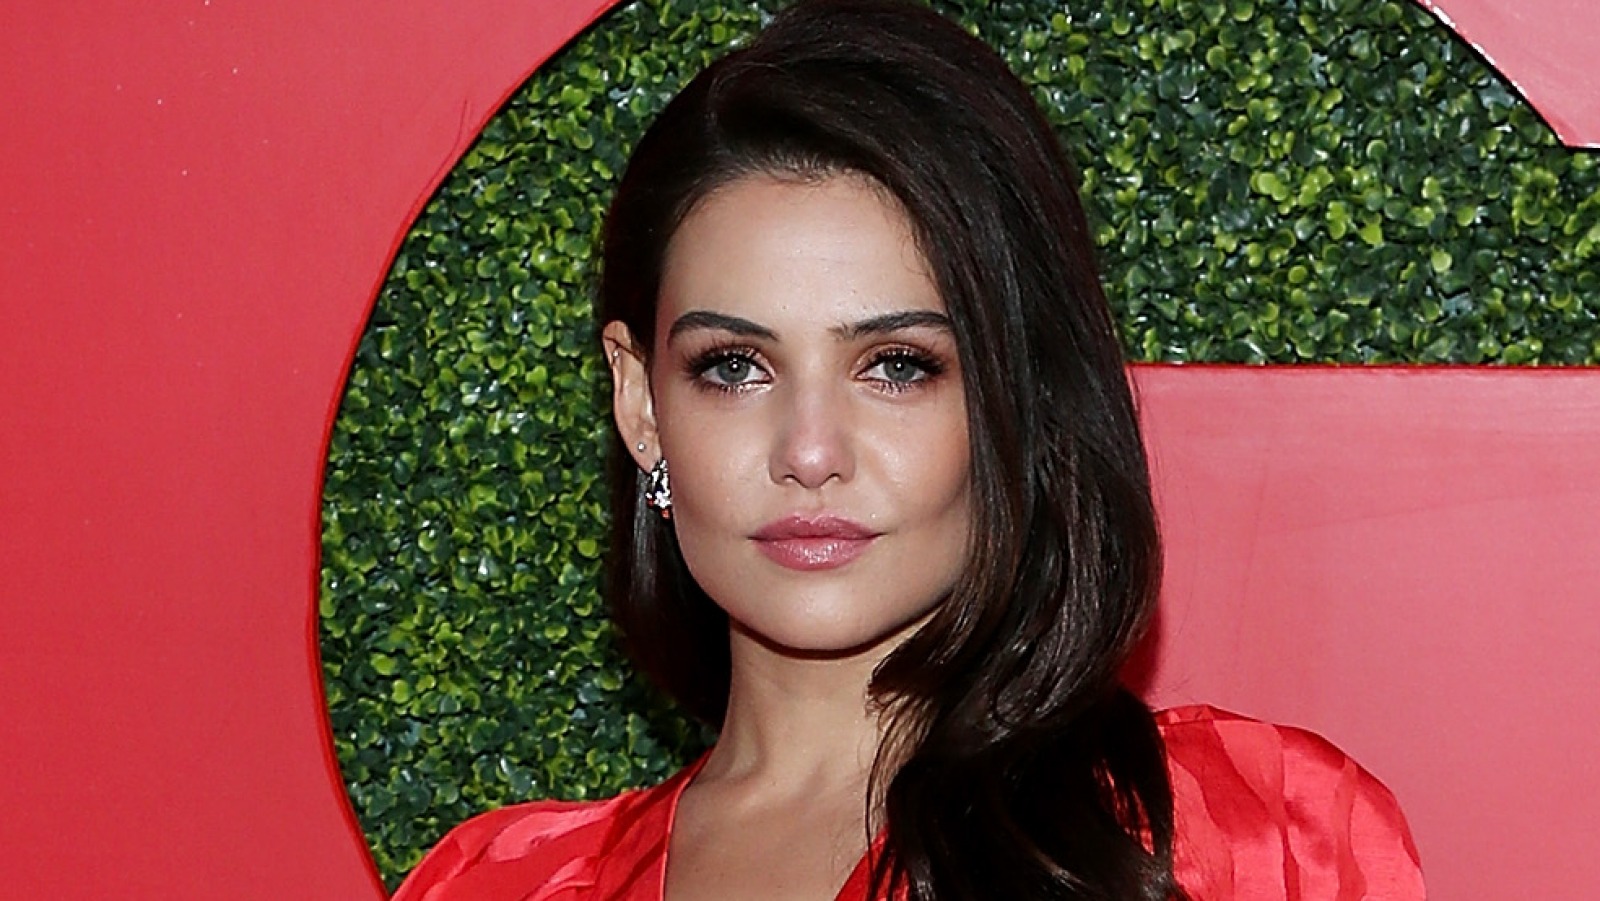 Danielle Campbell Returns as Davina on 'The Originals' in Episode